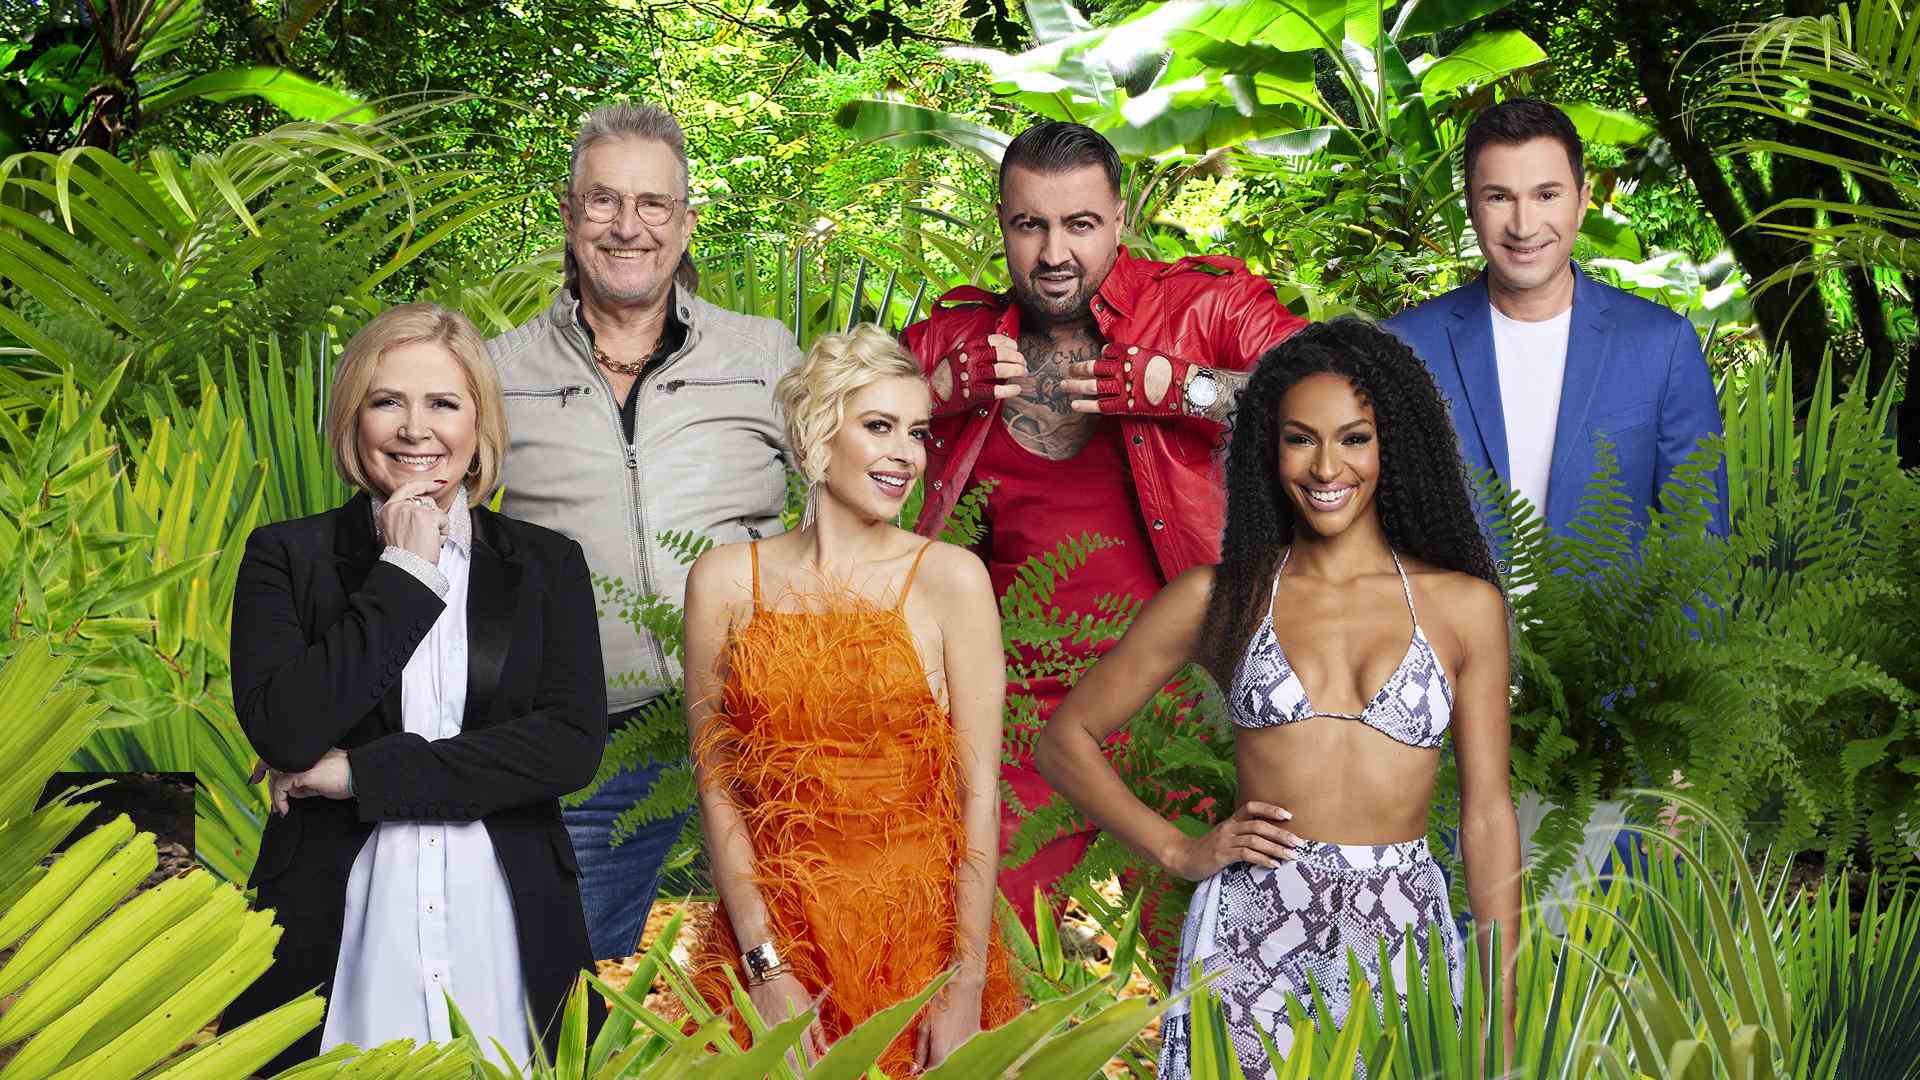 These stars move to the jungle camp New celebrities for Australia